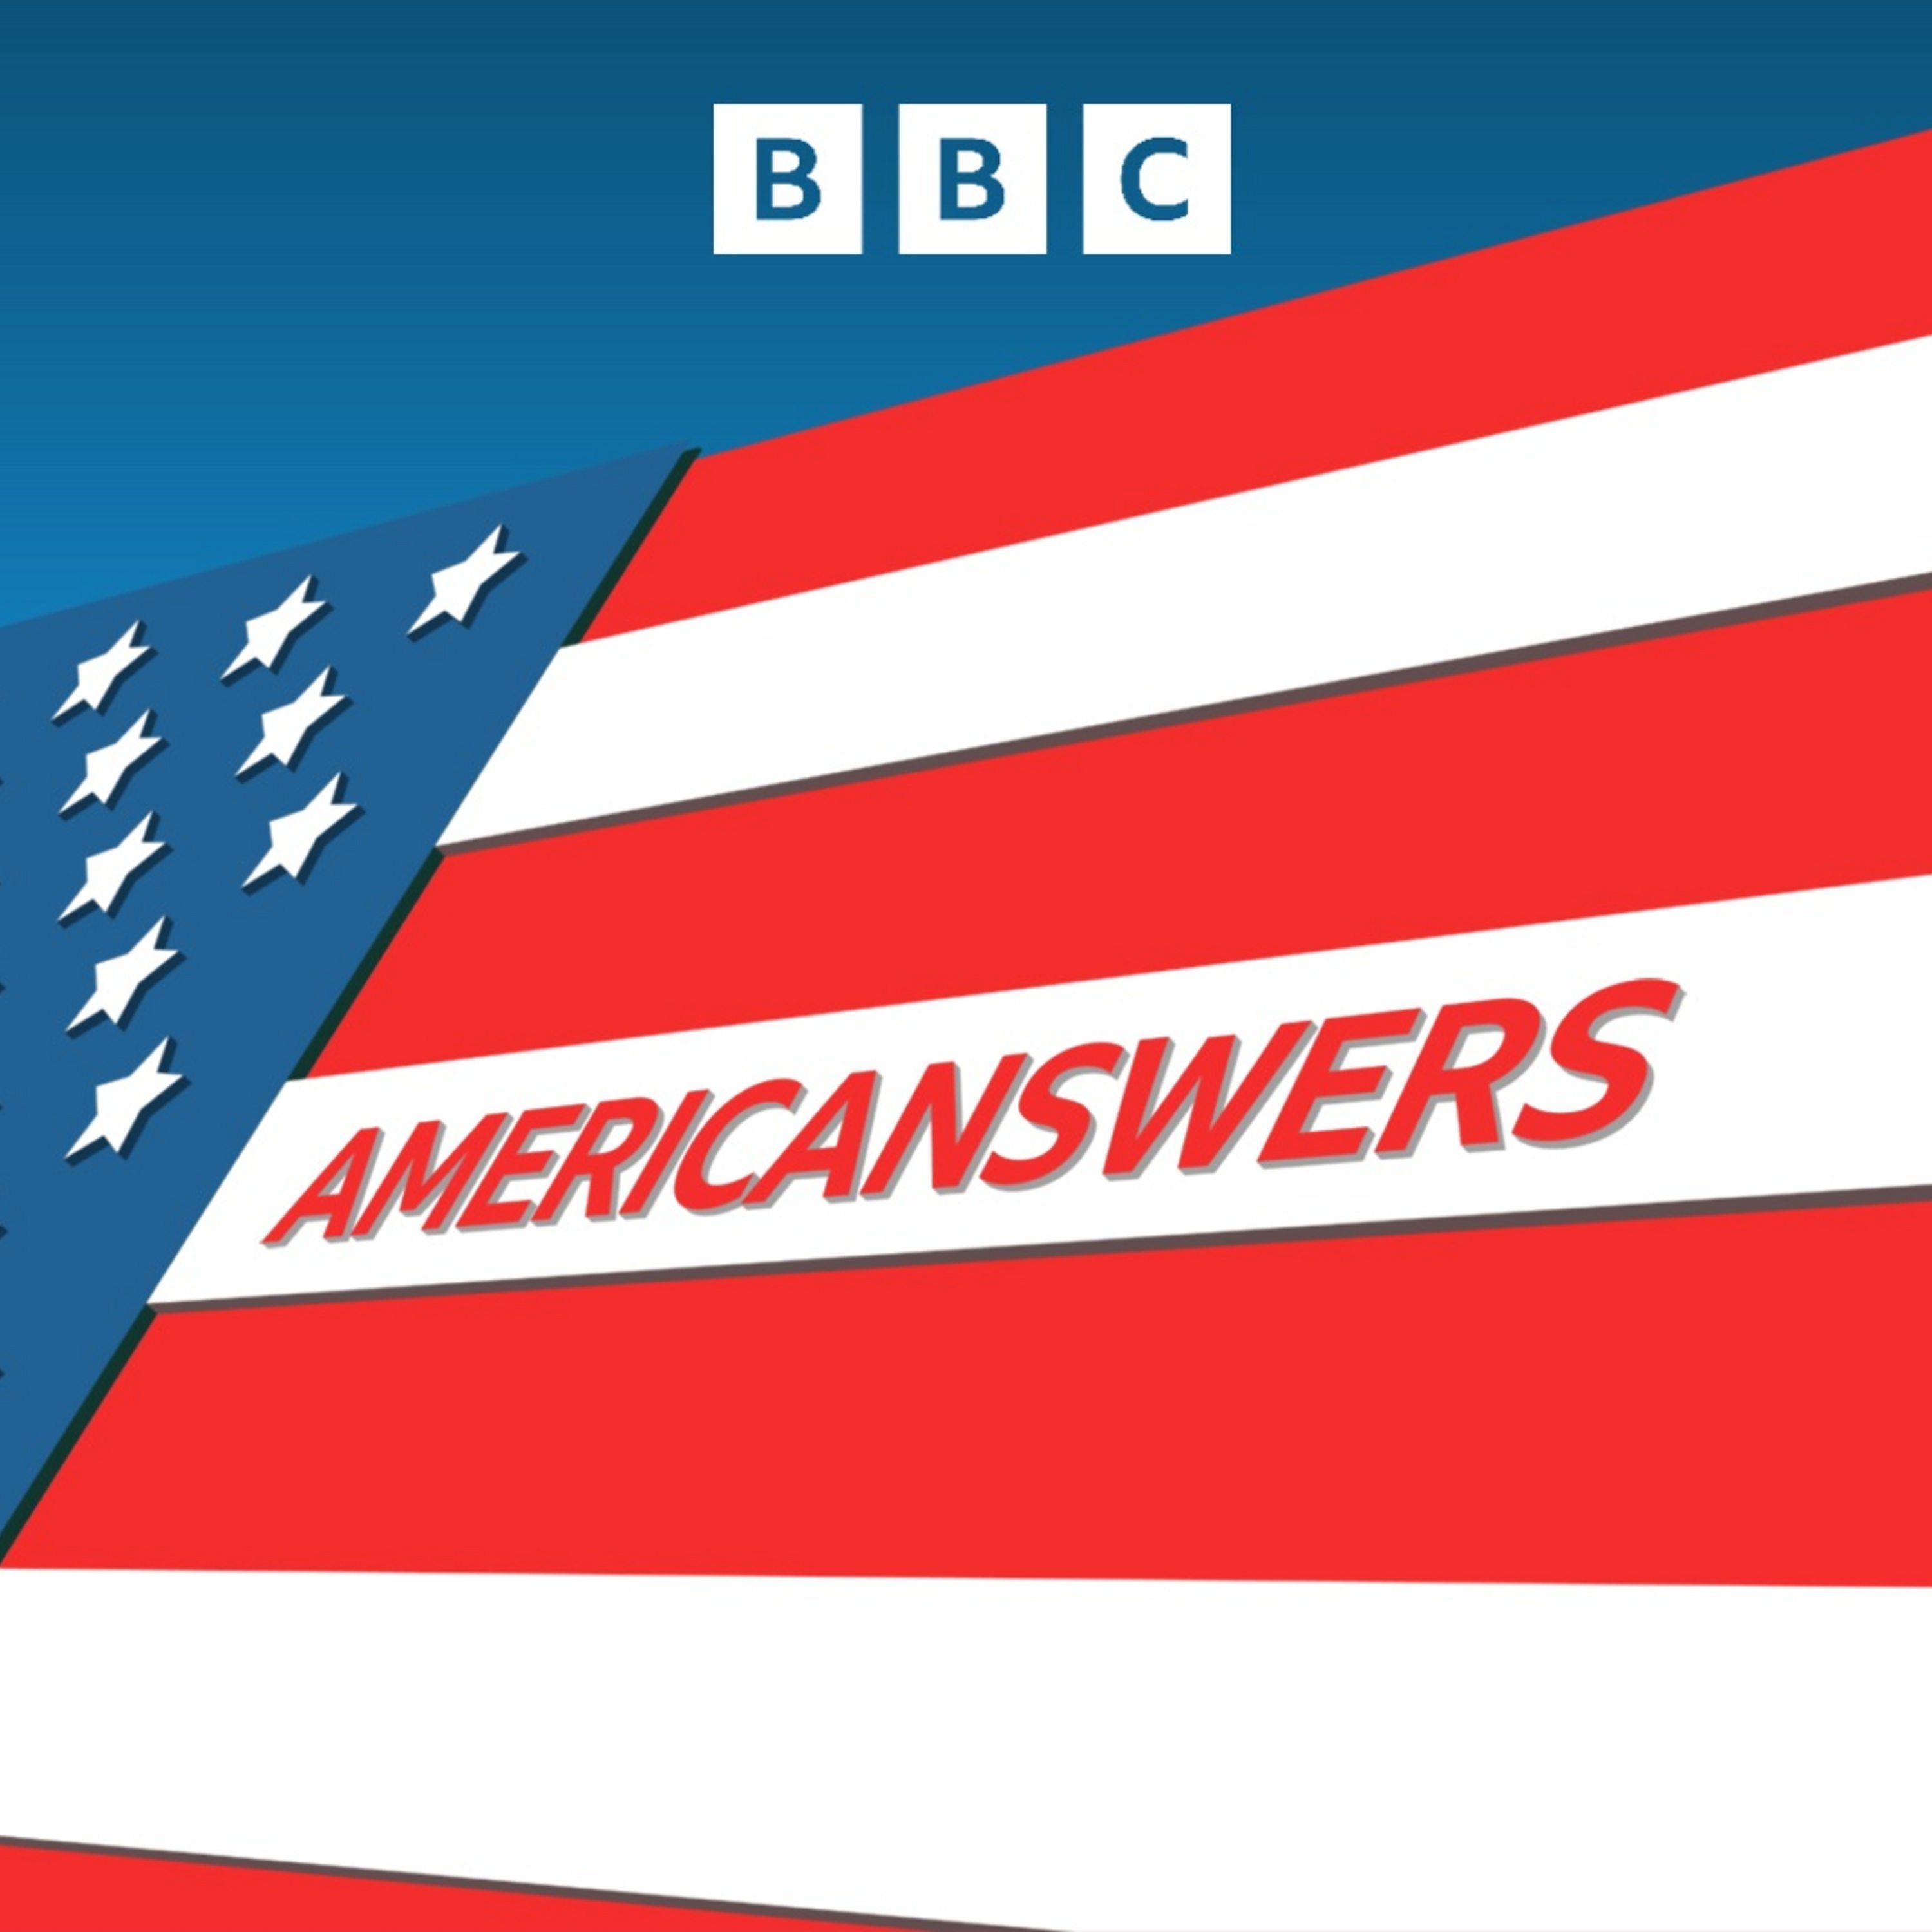 Americanswers! RFK Jr, pardoning Trump, and why is Biden talking about cannibals?